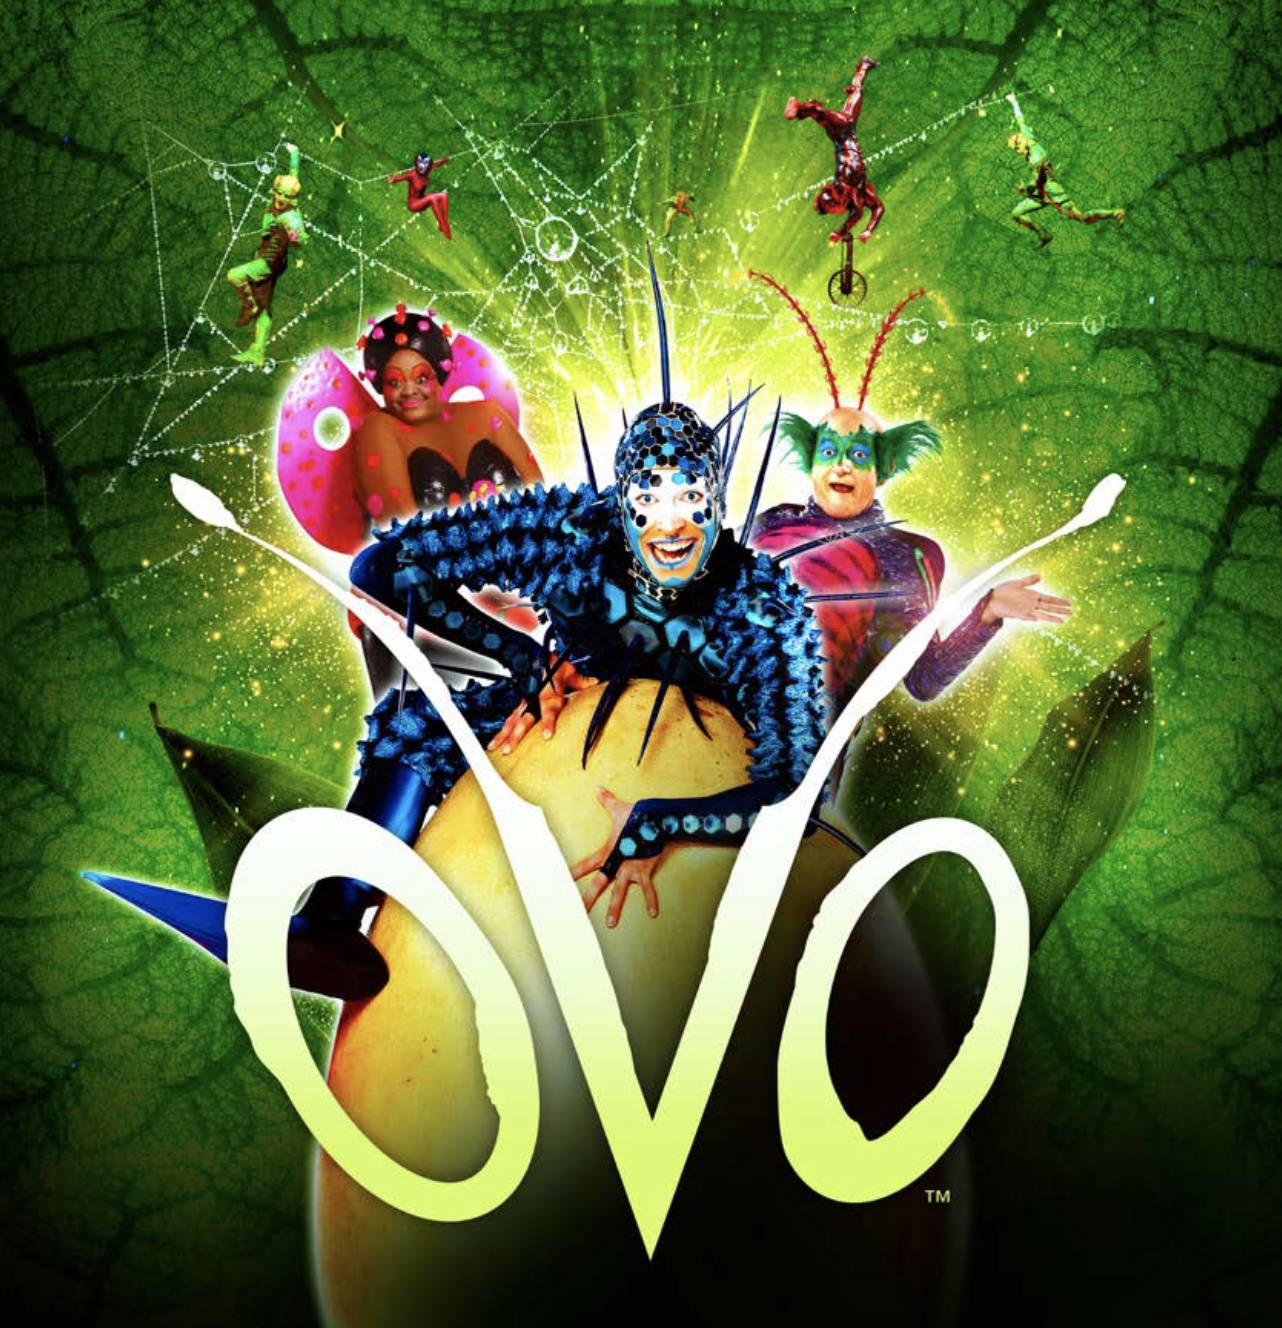 A VIVID CIRQUE DU SOLEIL SPECTACLE COMES TO THE NETHERLANDS, FOR THE